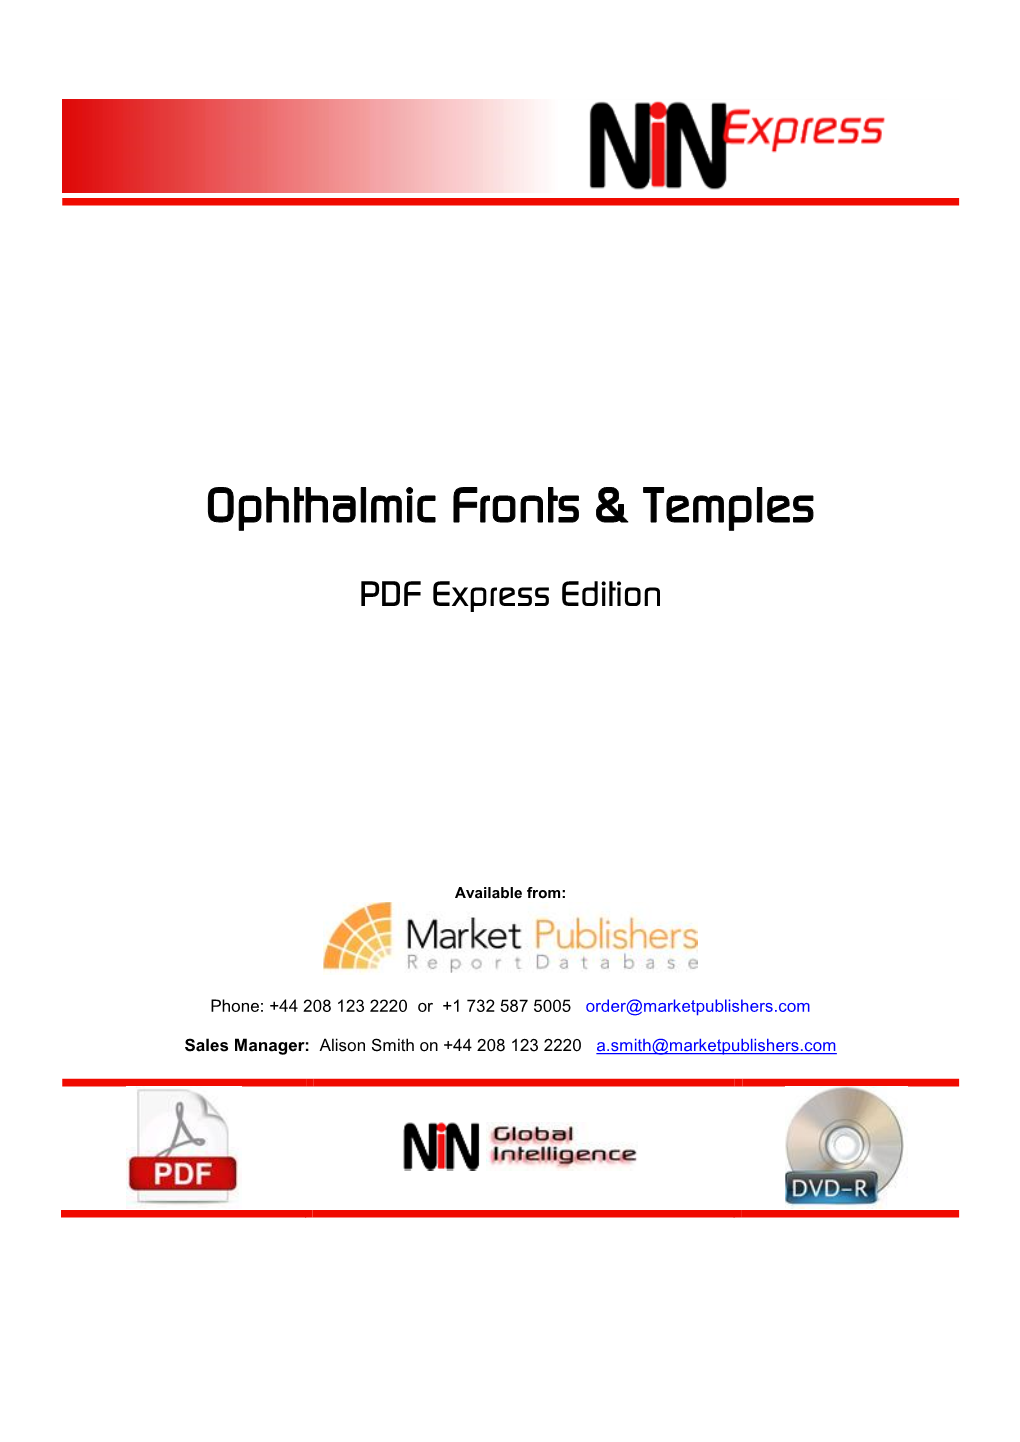 Ophthalmic Fronts & Temples